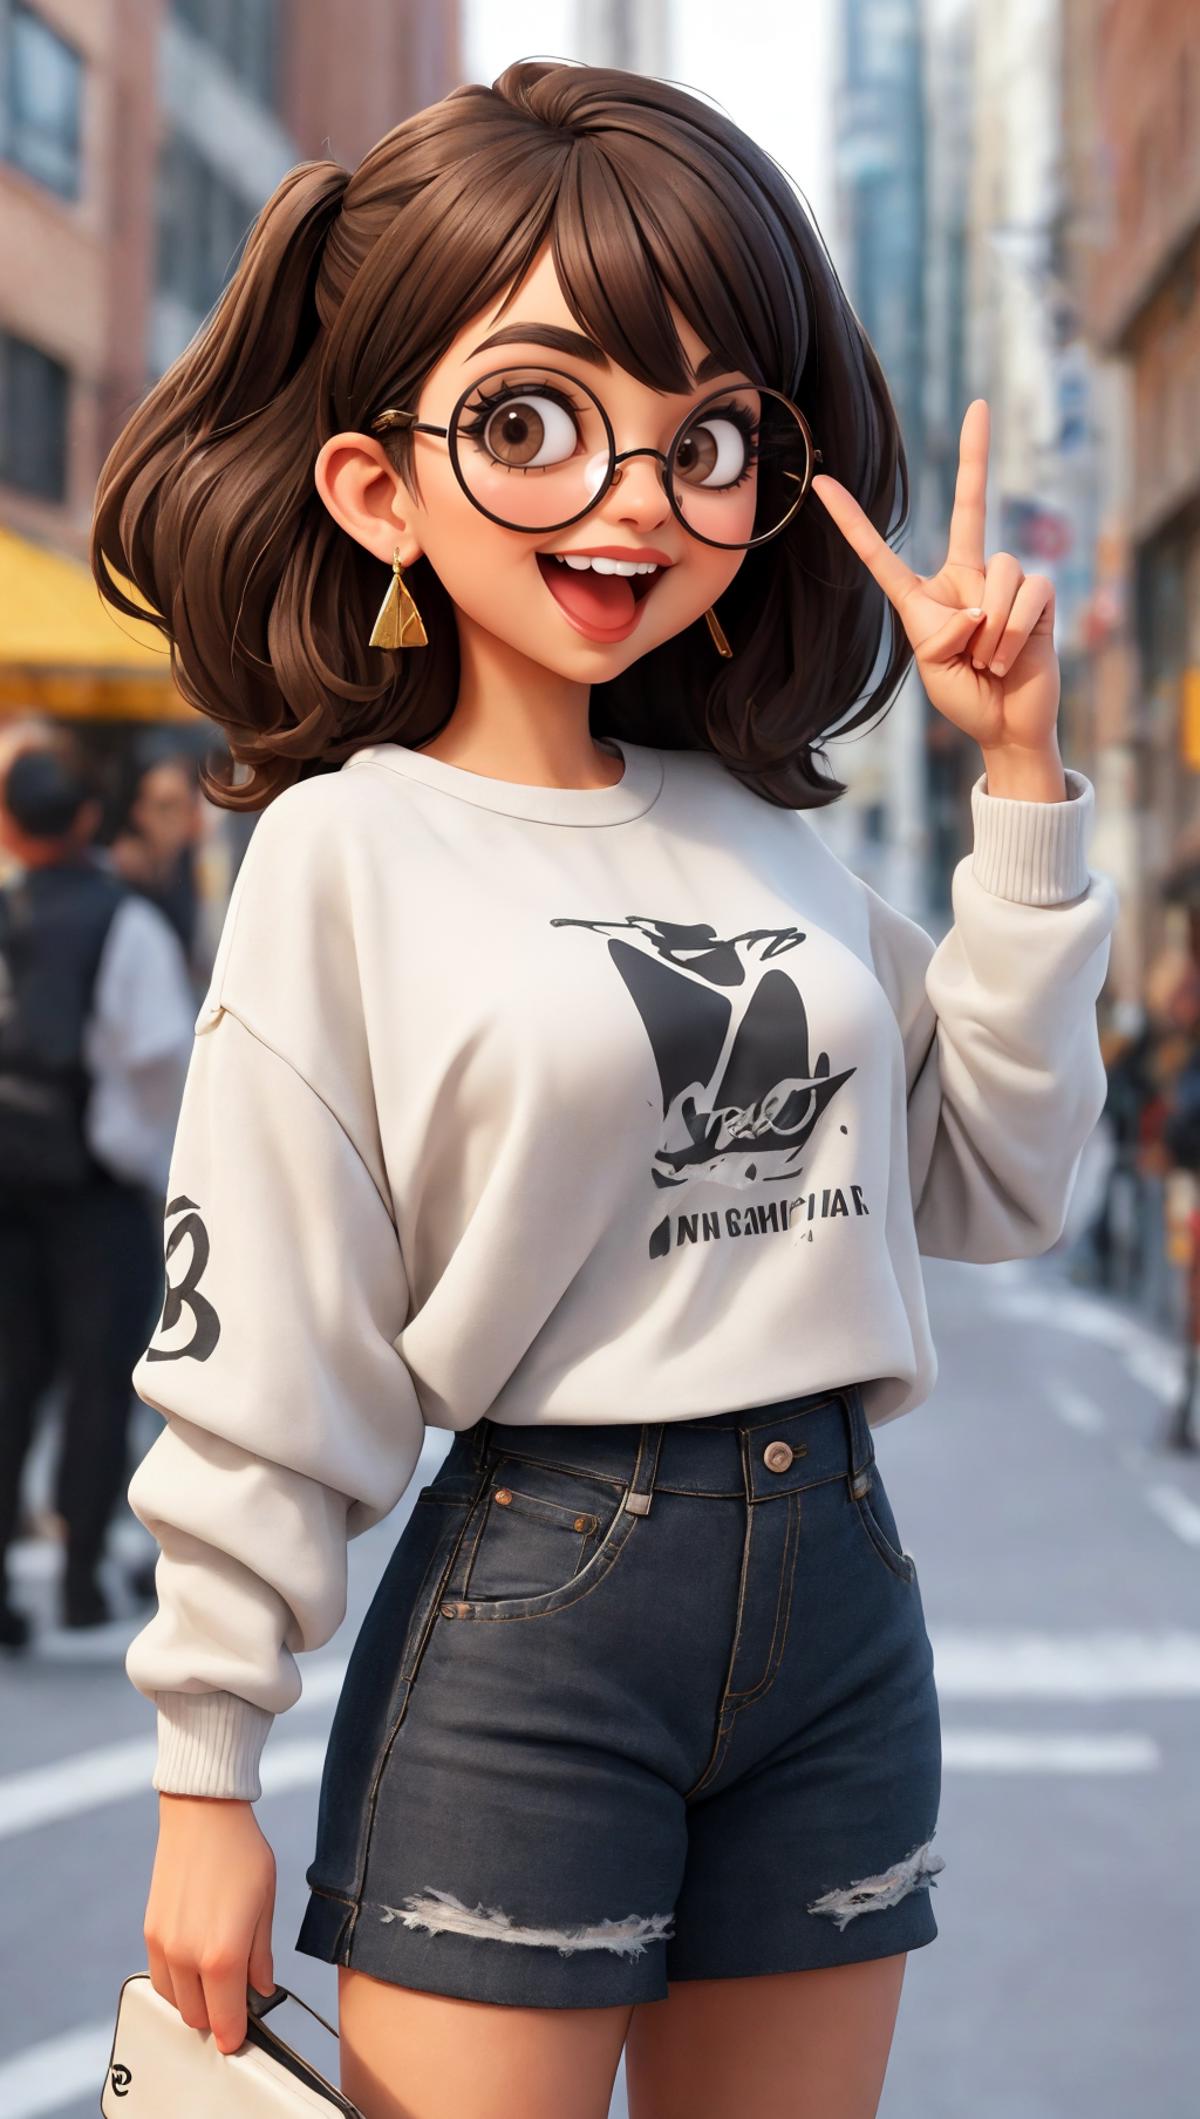 A girl with glasses wearing a white sweater and jeans.